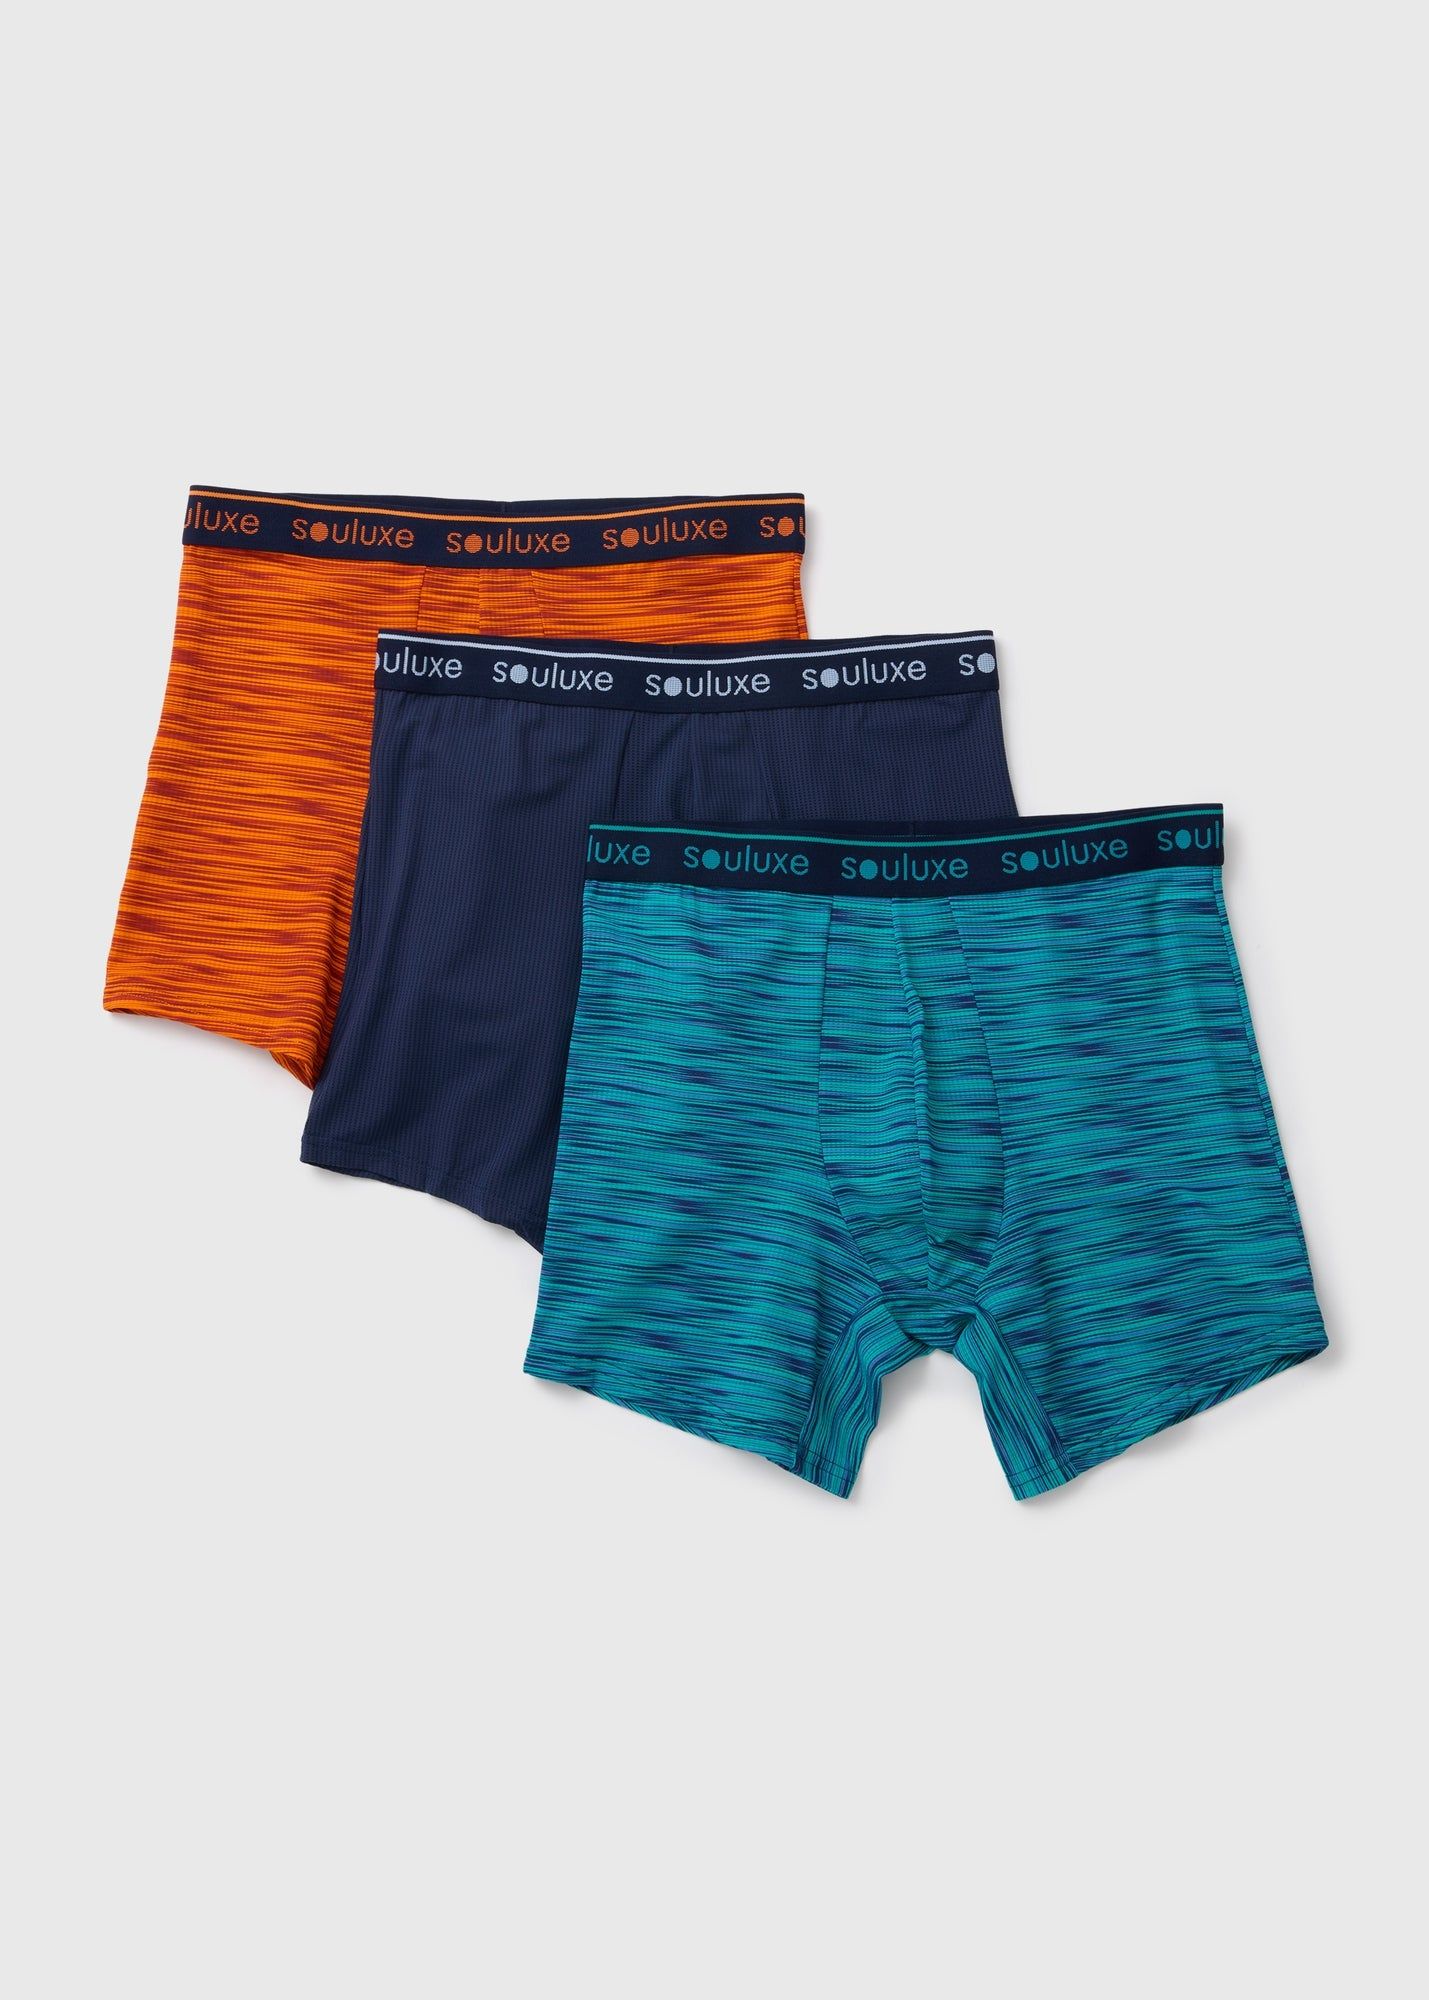 Buy Souluxe 3 Pack Space Dye Boxers Online in Oman from Matalan